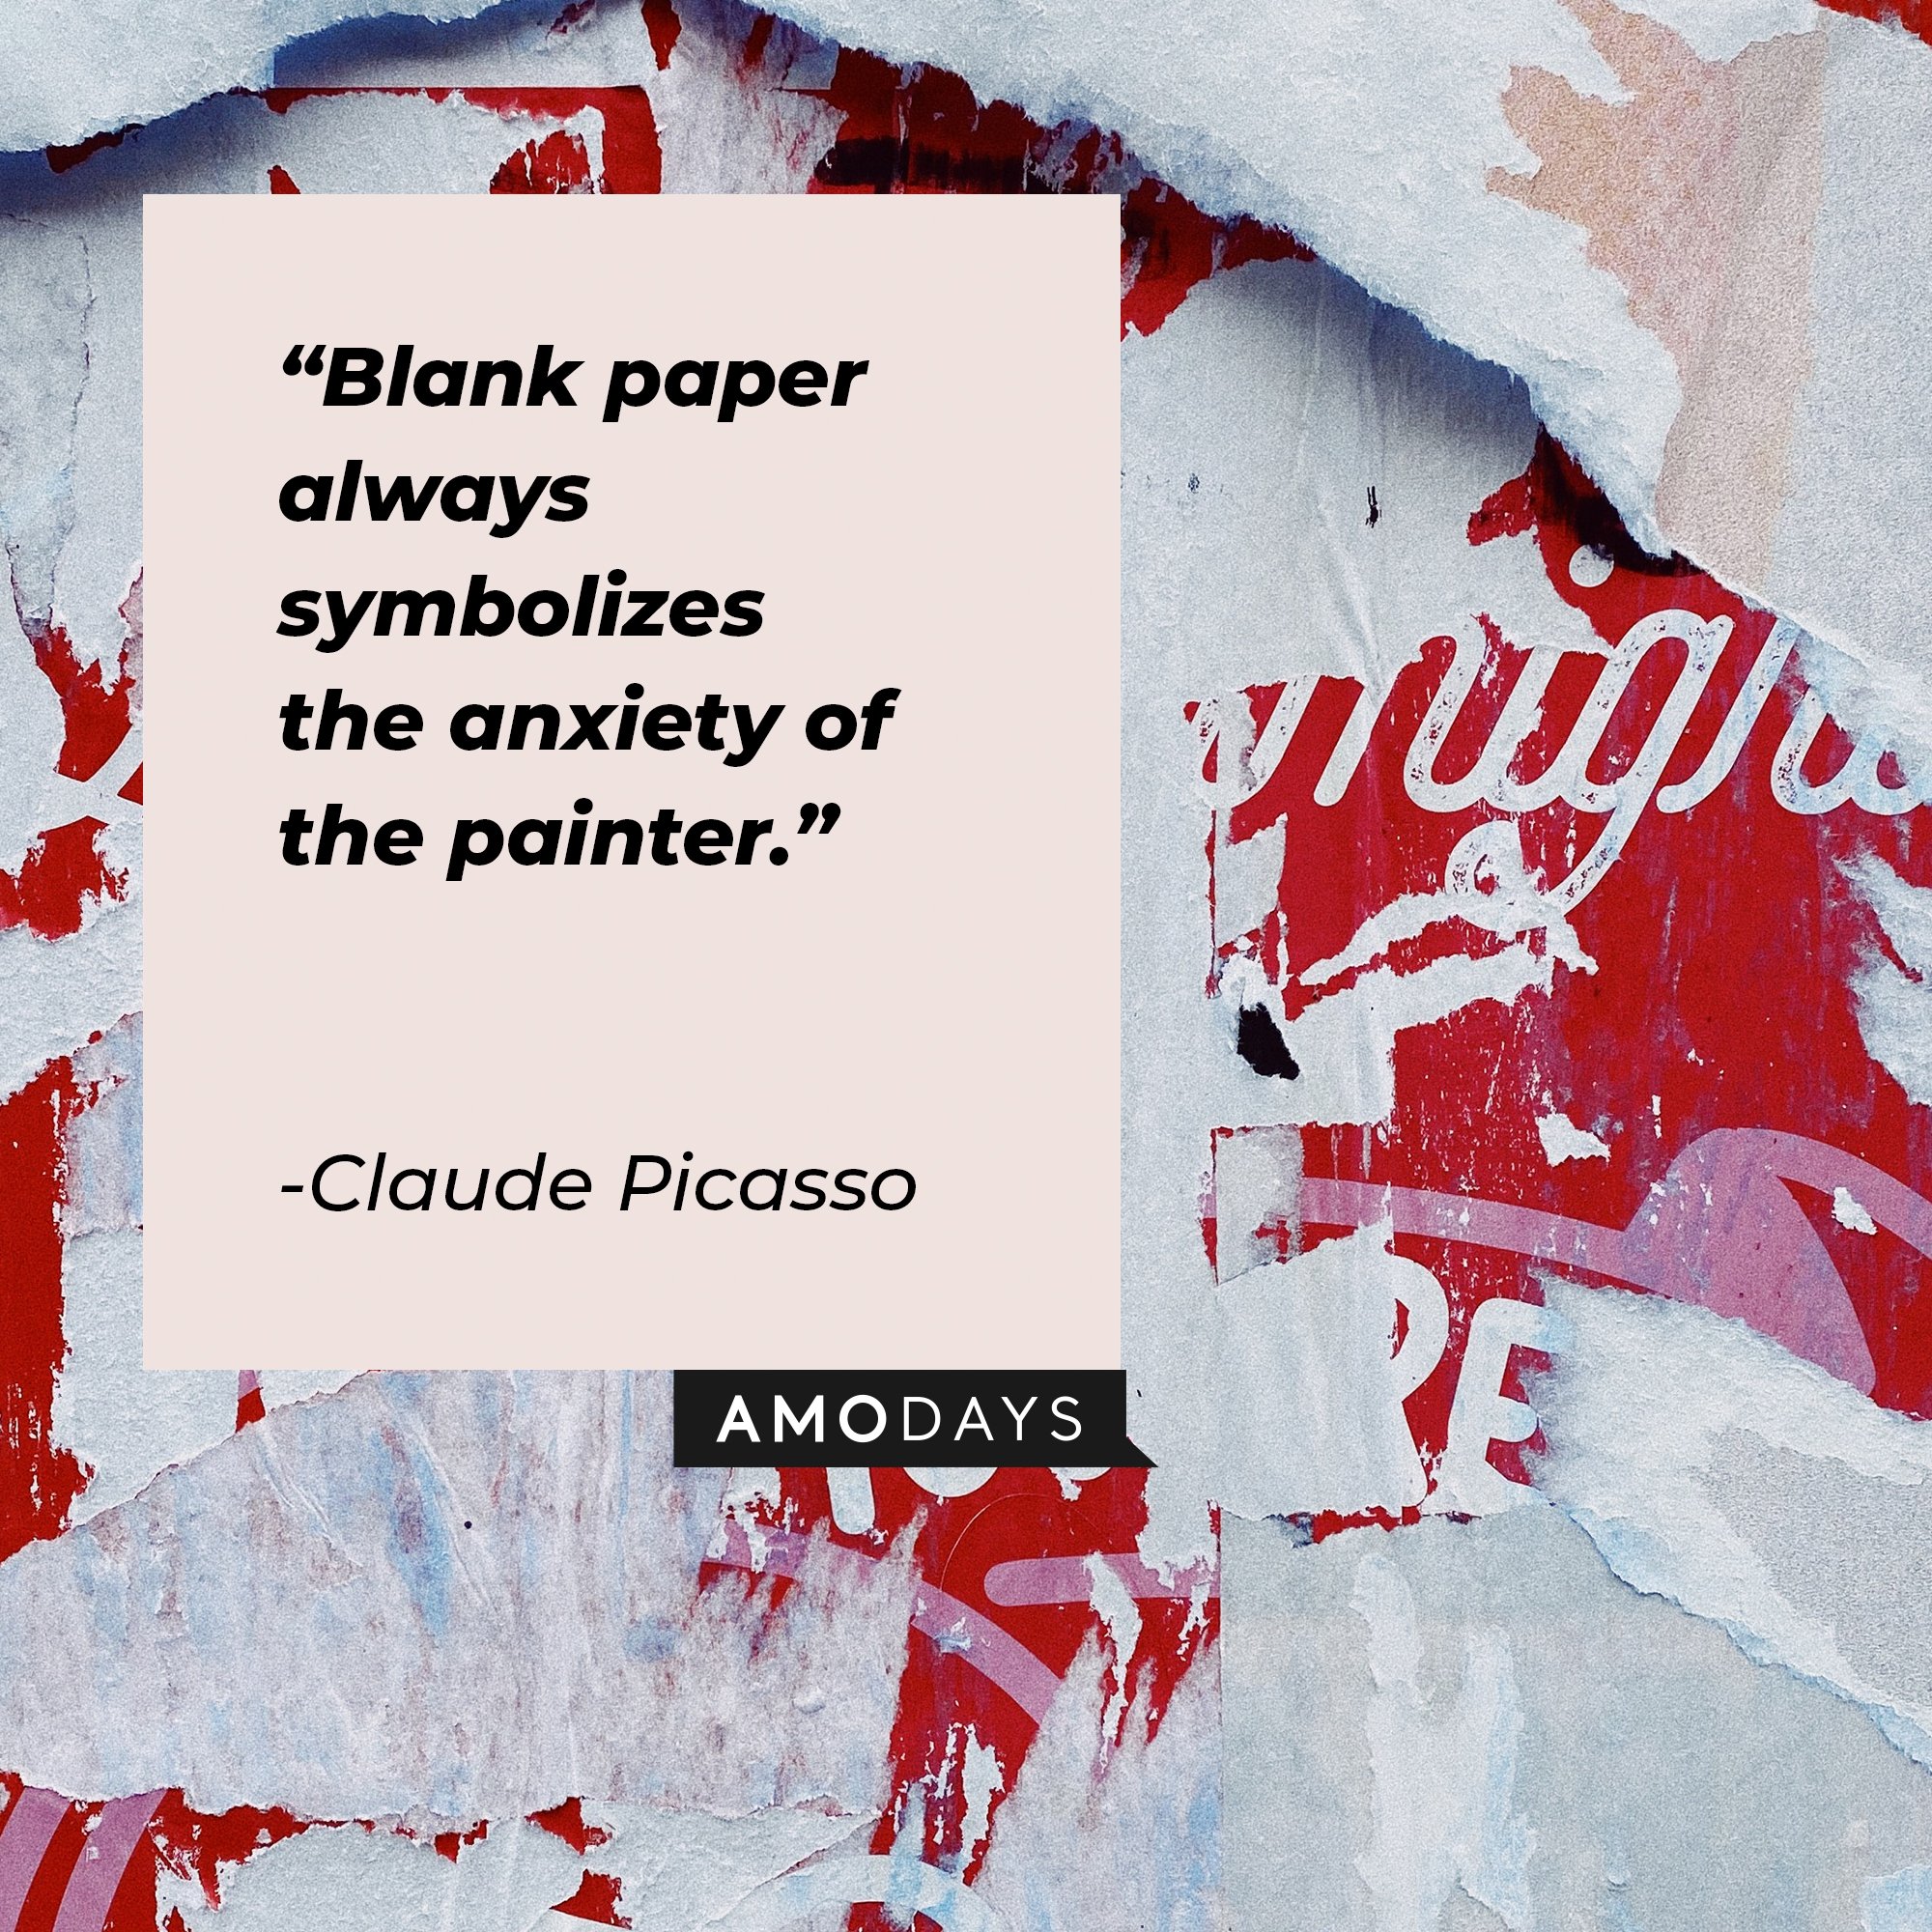 Claude Picasso’s quote: "Blank paper always symbolizes the anxiety of the painter." | Image: AmoDays